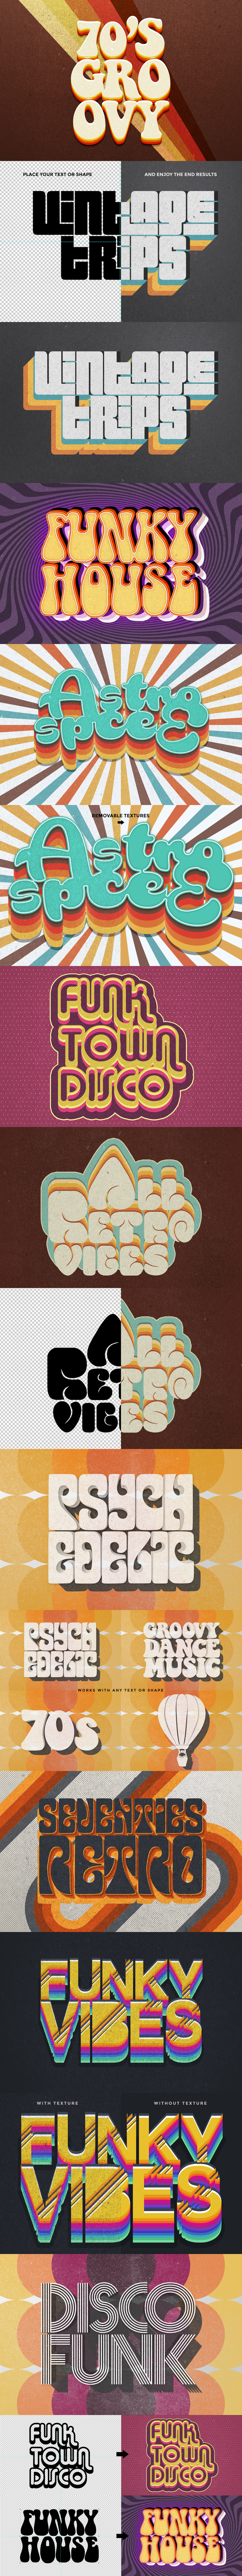 70s 80s text effects Retro photoshop vintage funky groove